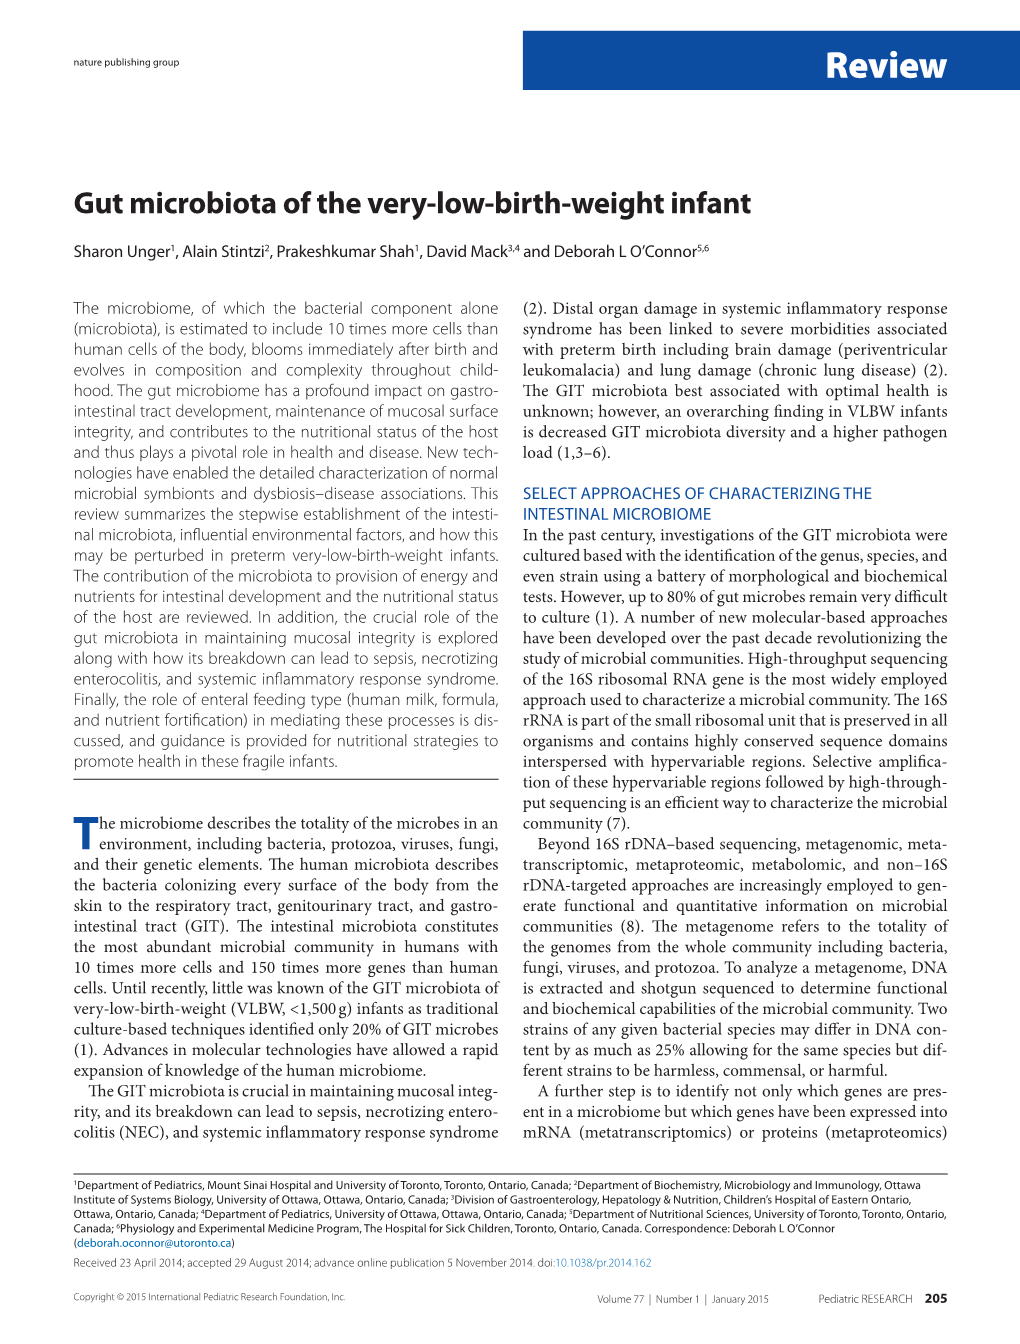 Gut Microbiota of the Very-Low-Birth-Weight Infant